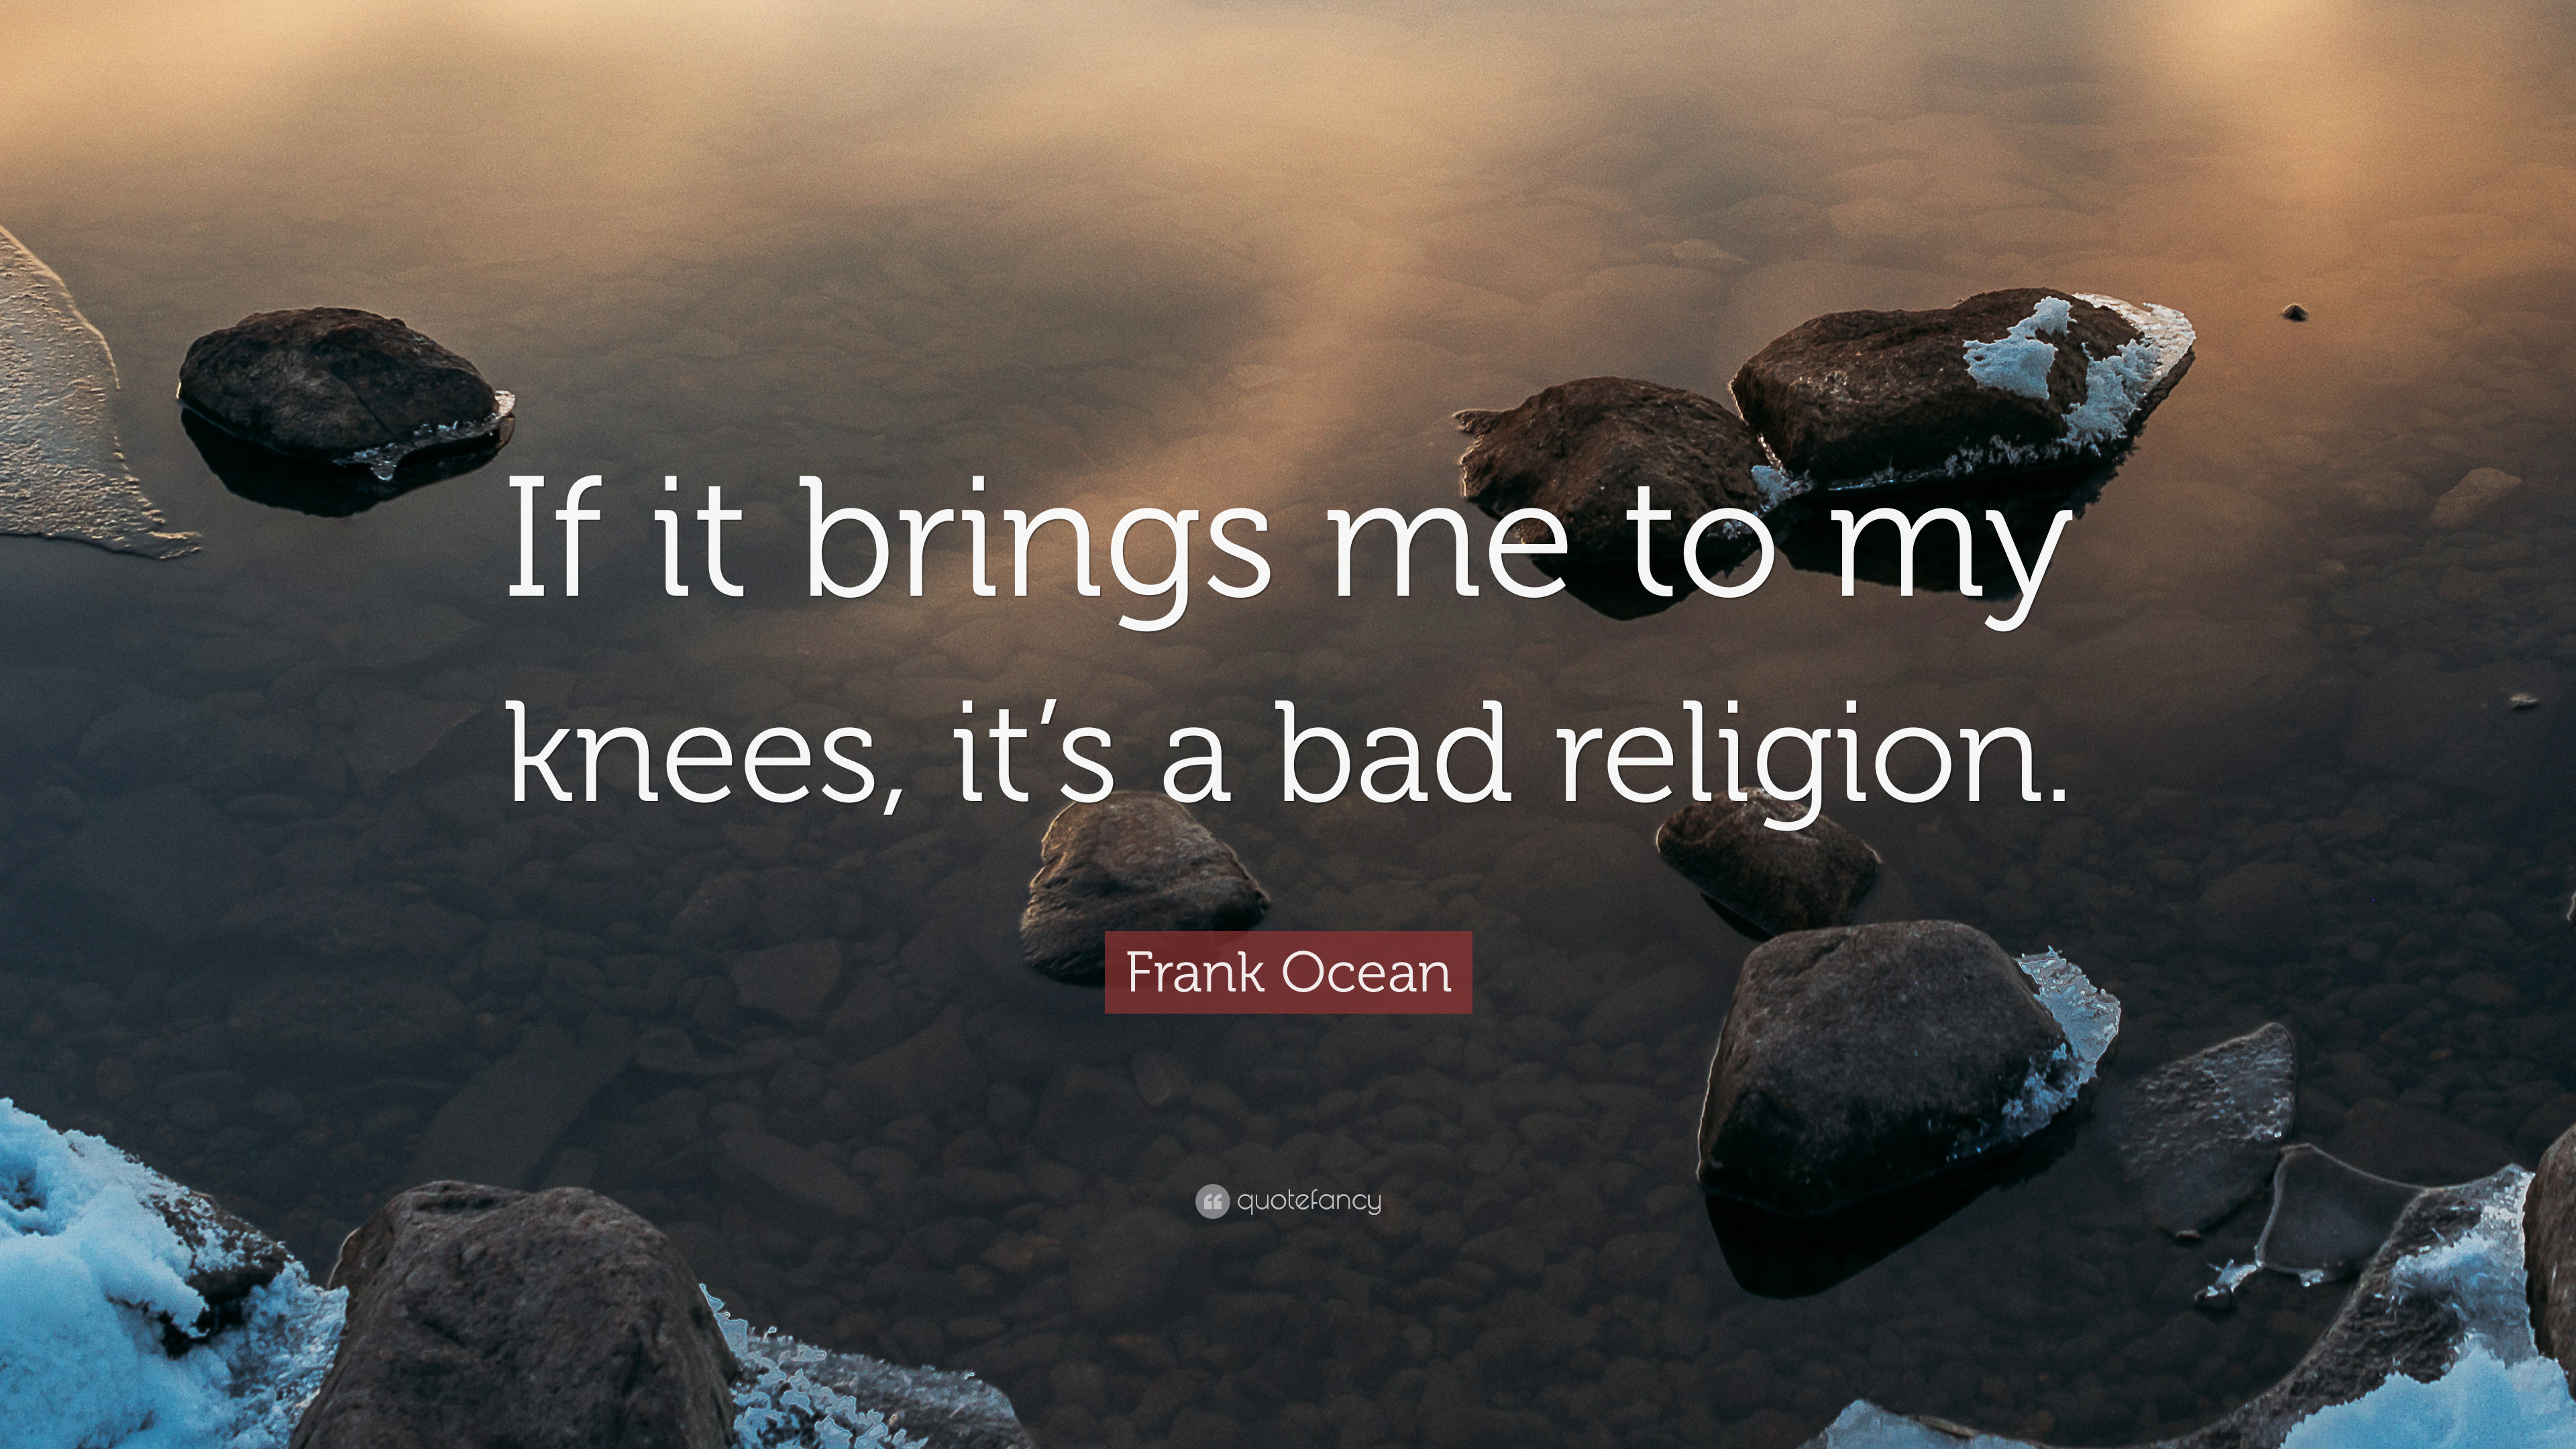 3840x2160 Frank Ocean Quote: “If it brings me to my knees, it's a bad